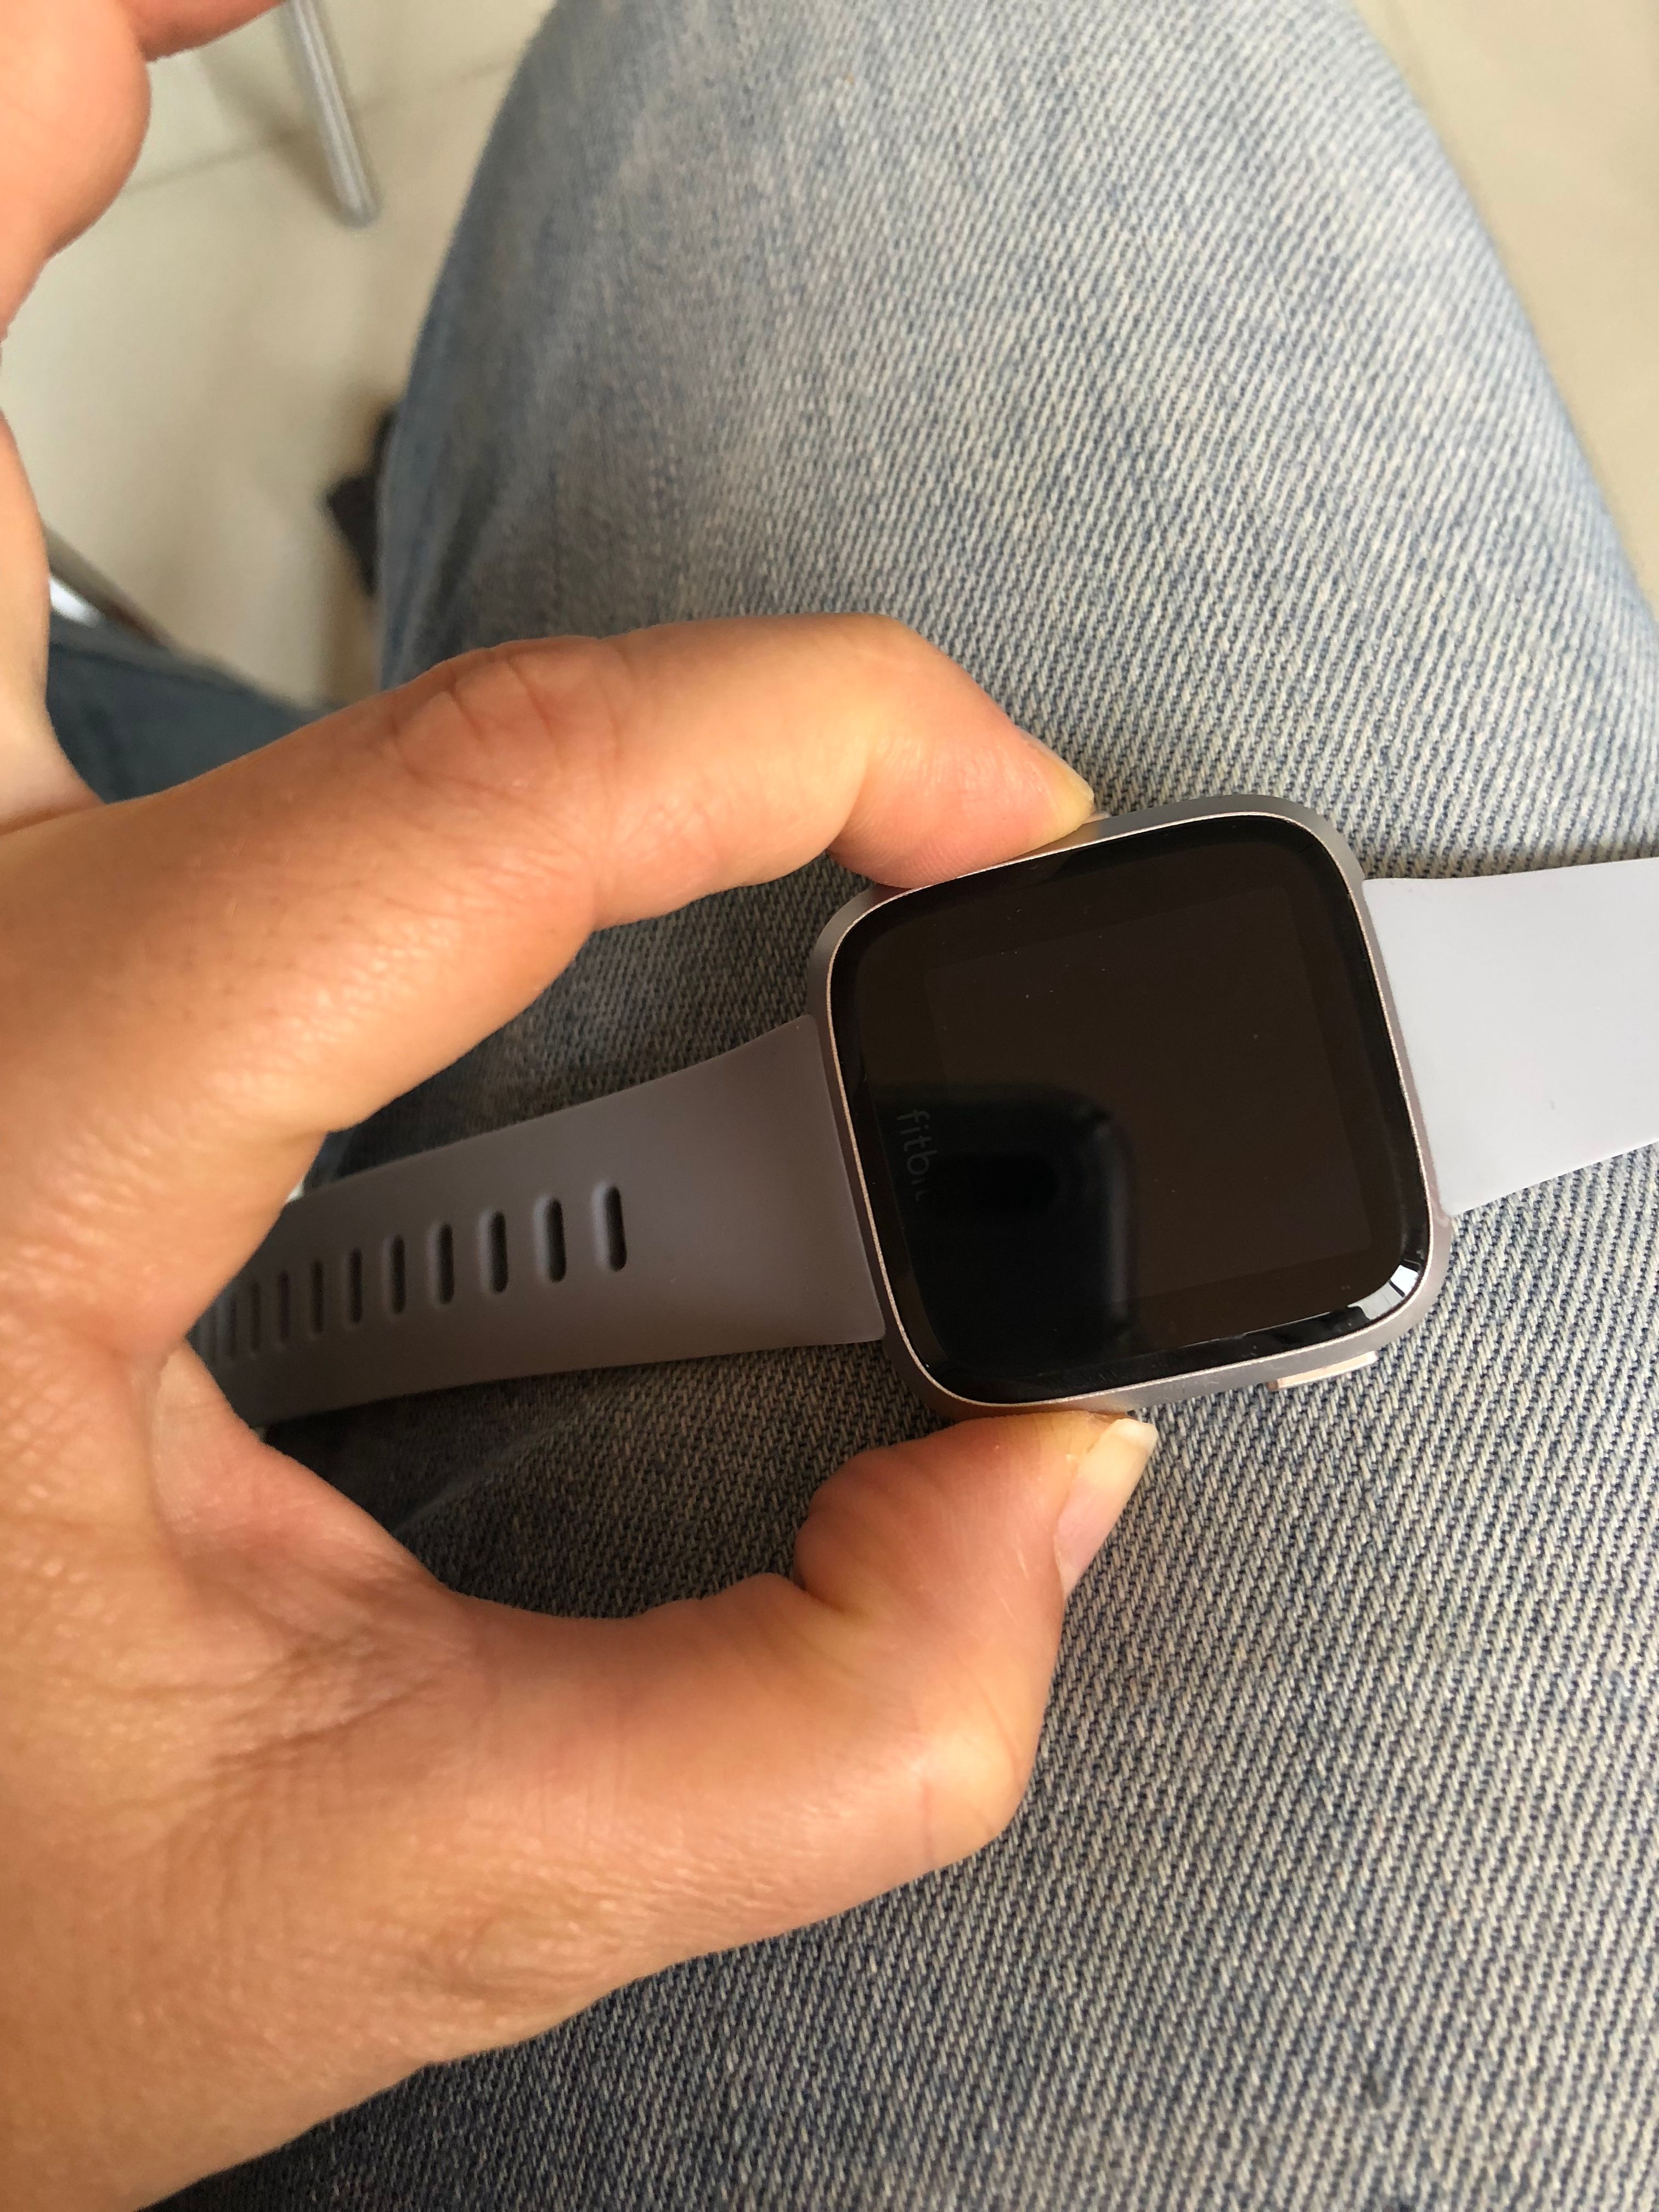 how to change the screen on fitbit versa